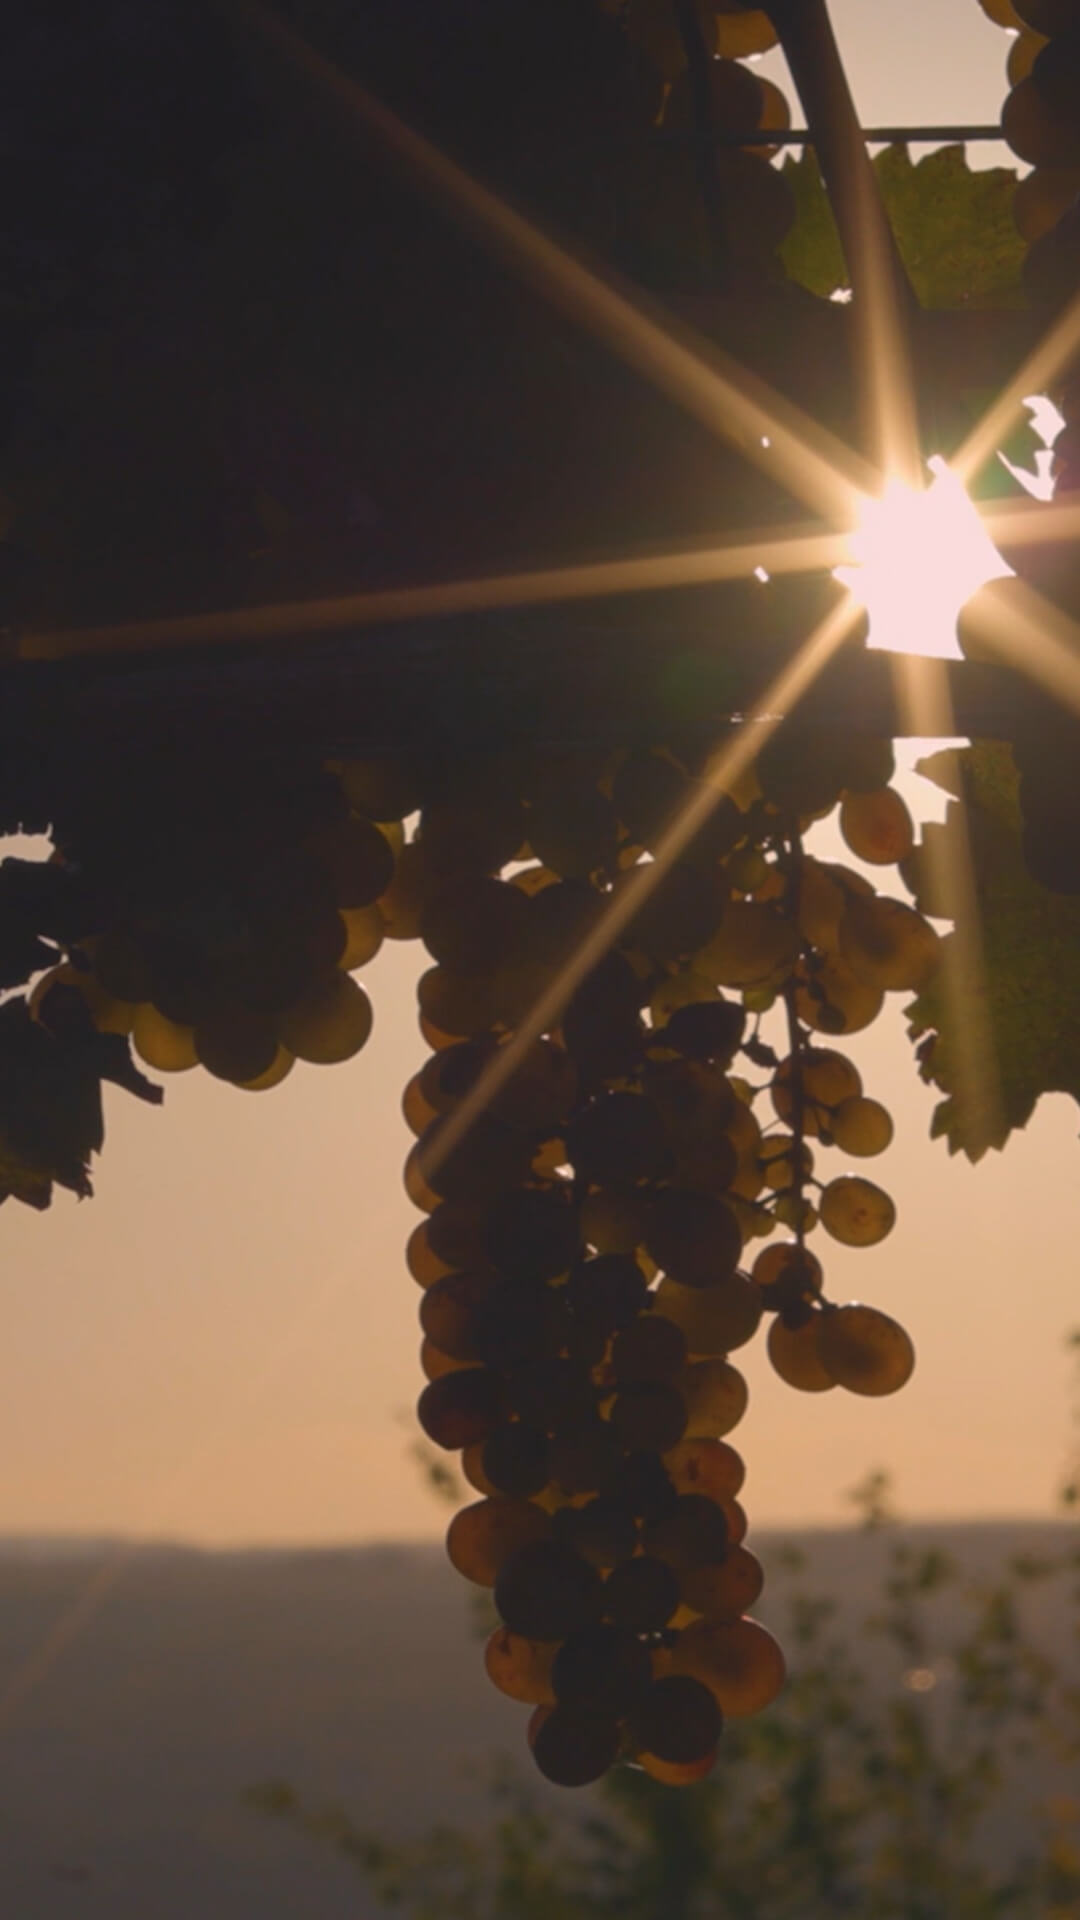 Grapes in Vineyard on Wine at Sunset